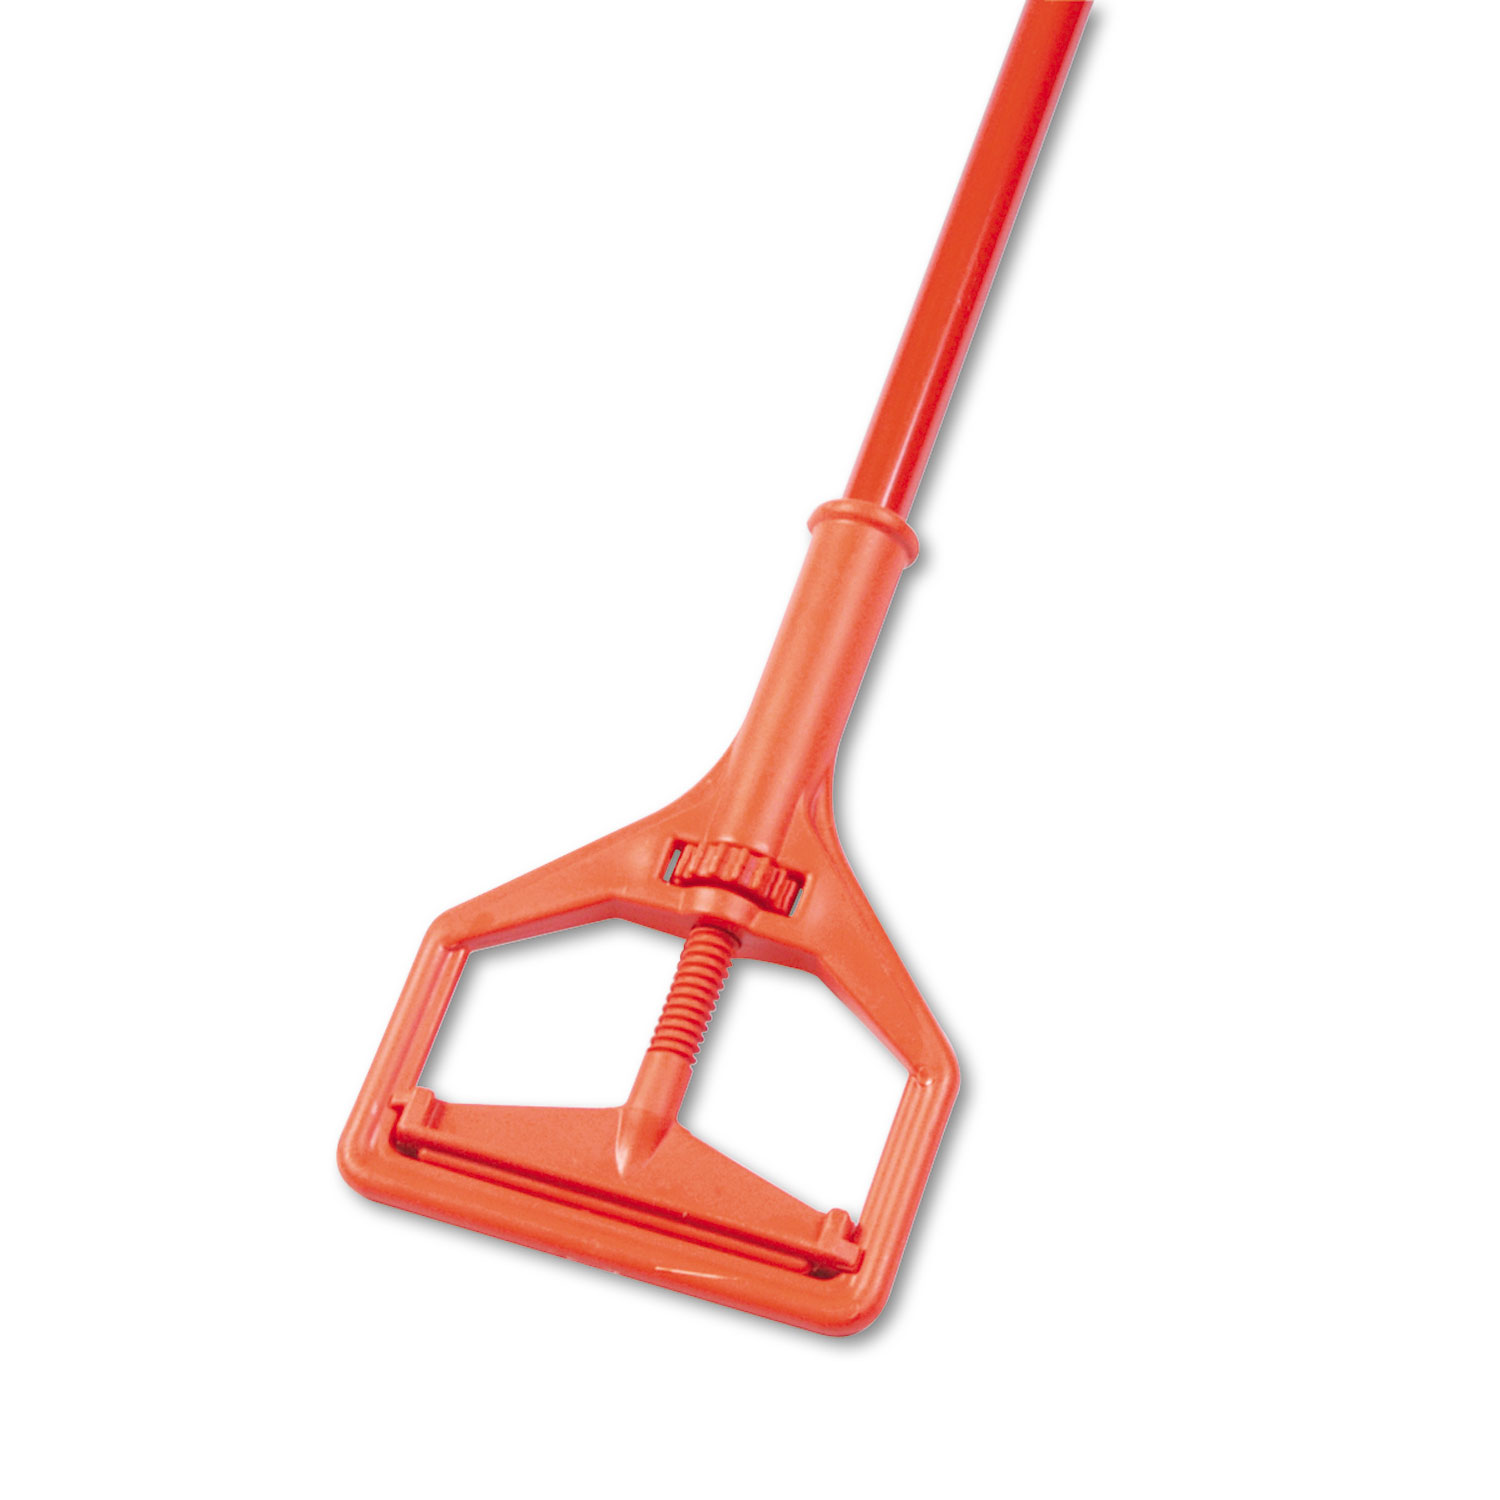 Janitor Style Screw Clamp Mop Handle, Fiberglass, 64in, Safety Orange